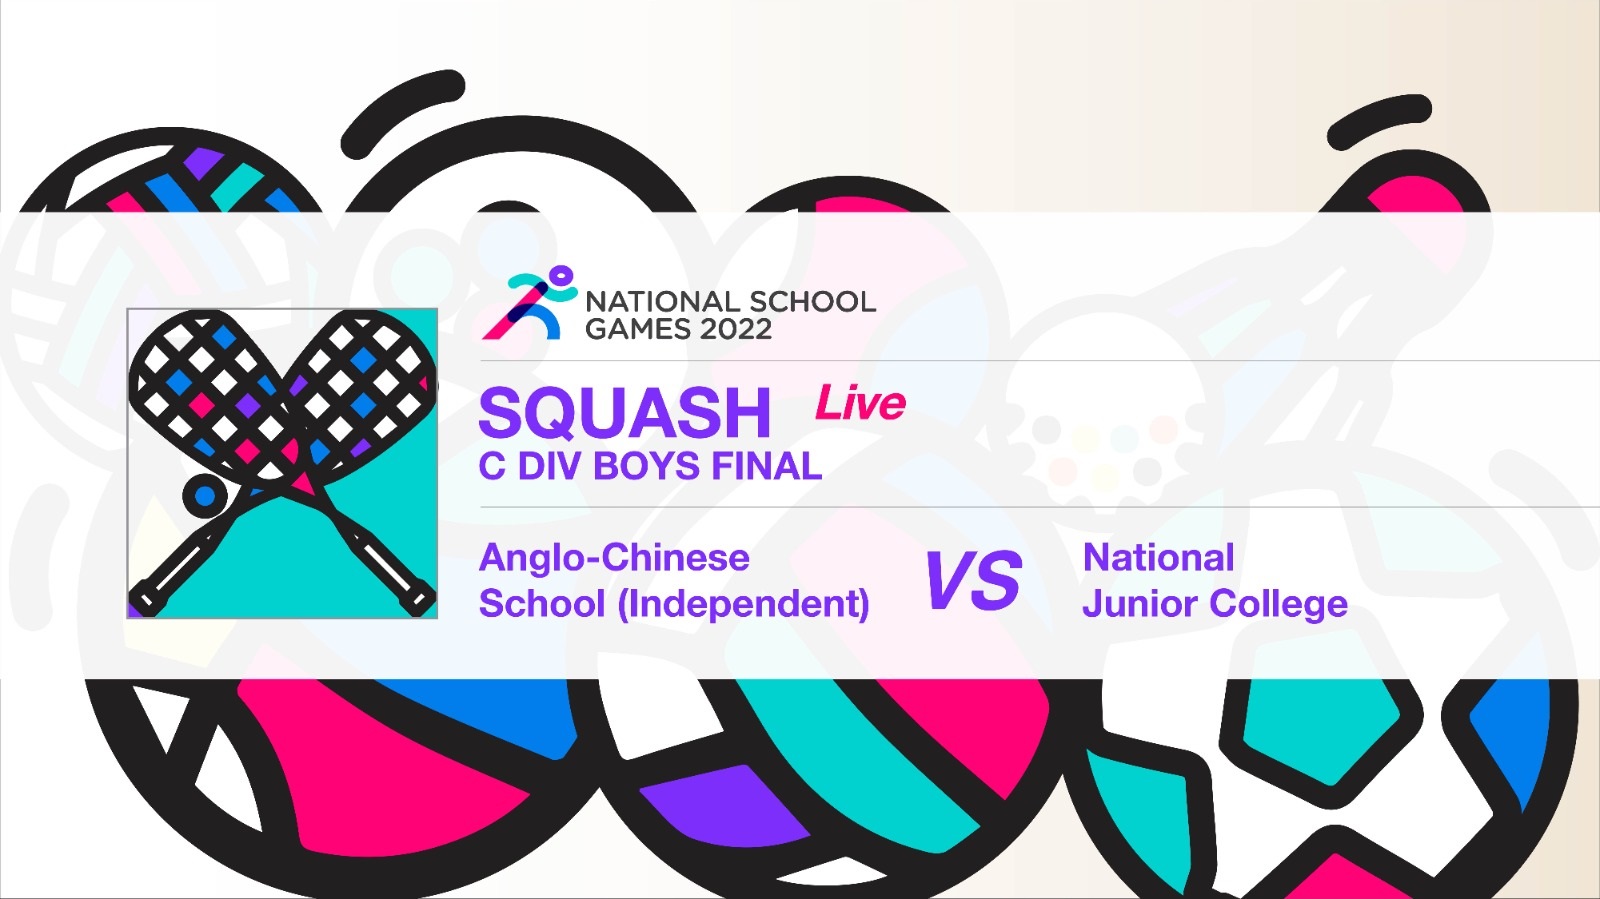 SSSC Squash National C Division Boys Final | Anglo-Chinese School (Independent) vs National Junior College